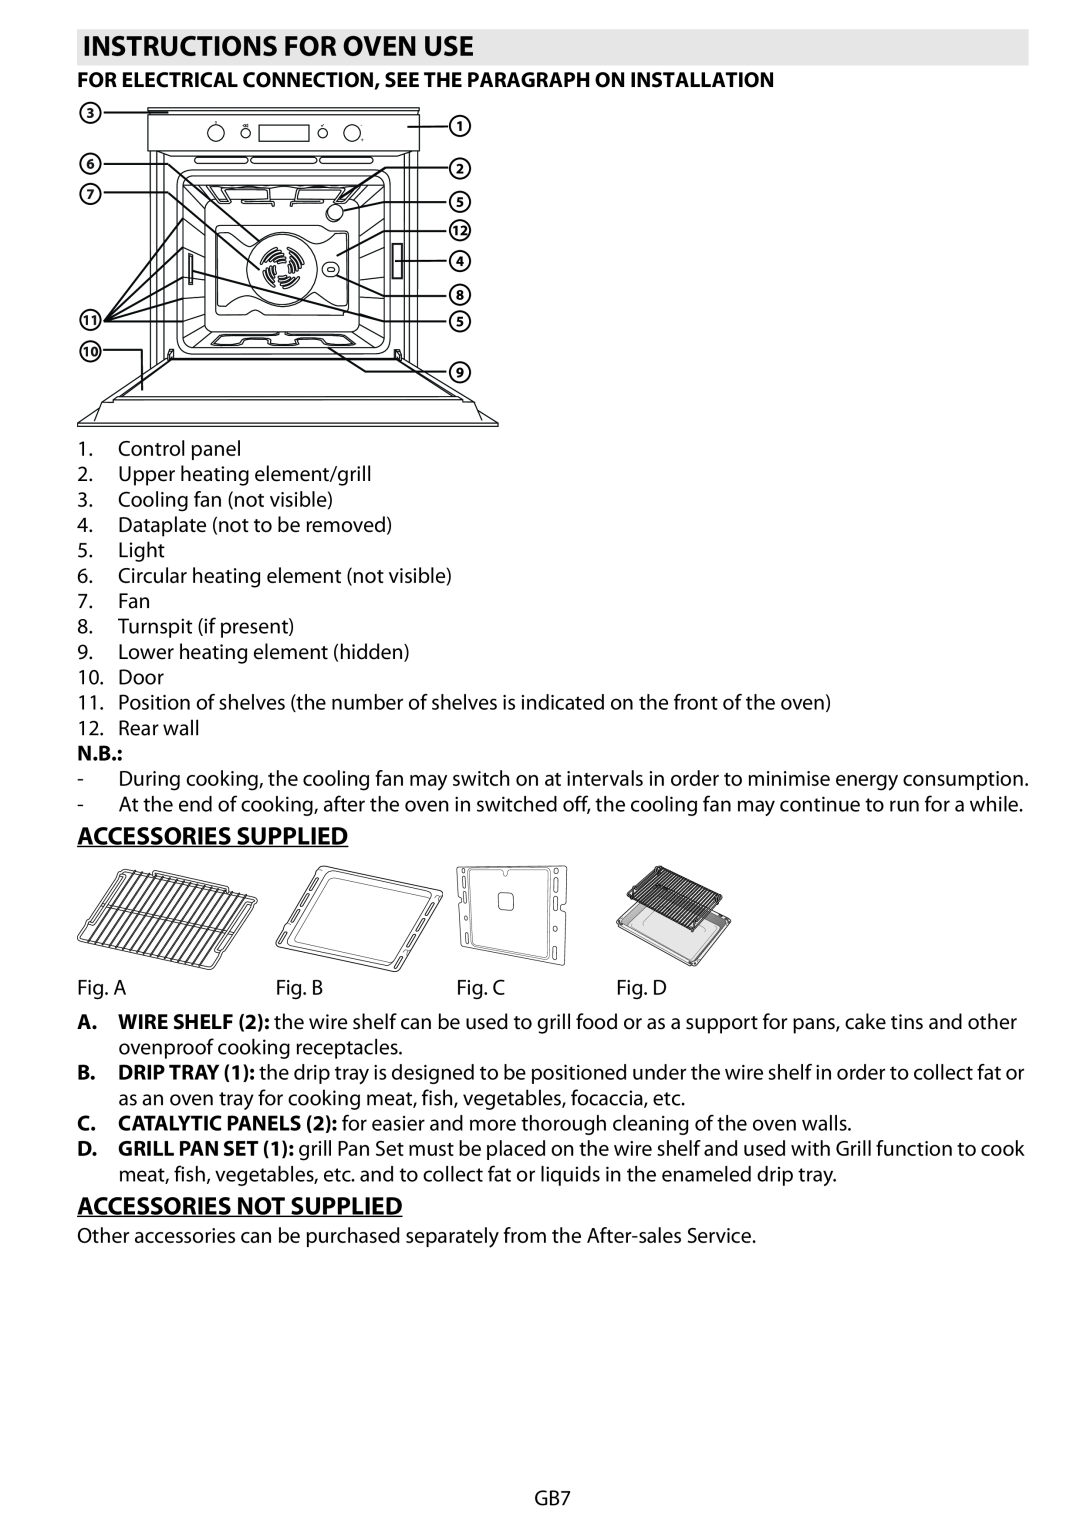 Whirlpool AKZM 788 manual Instructions For Oven Use, Accessories Supplied, Accessories Not Supplied 